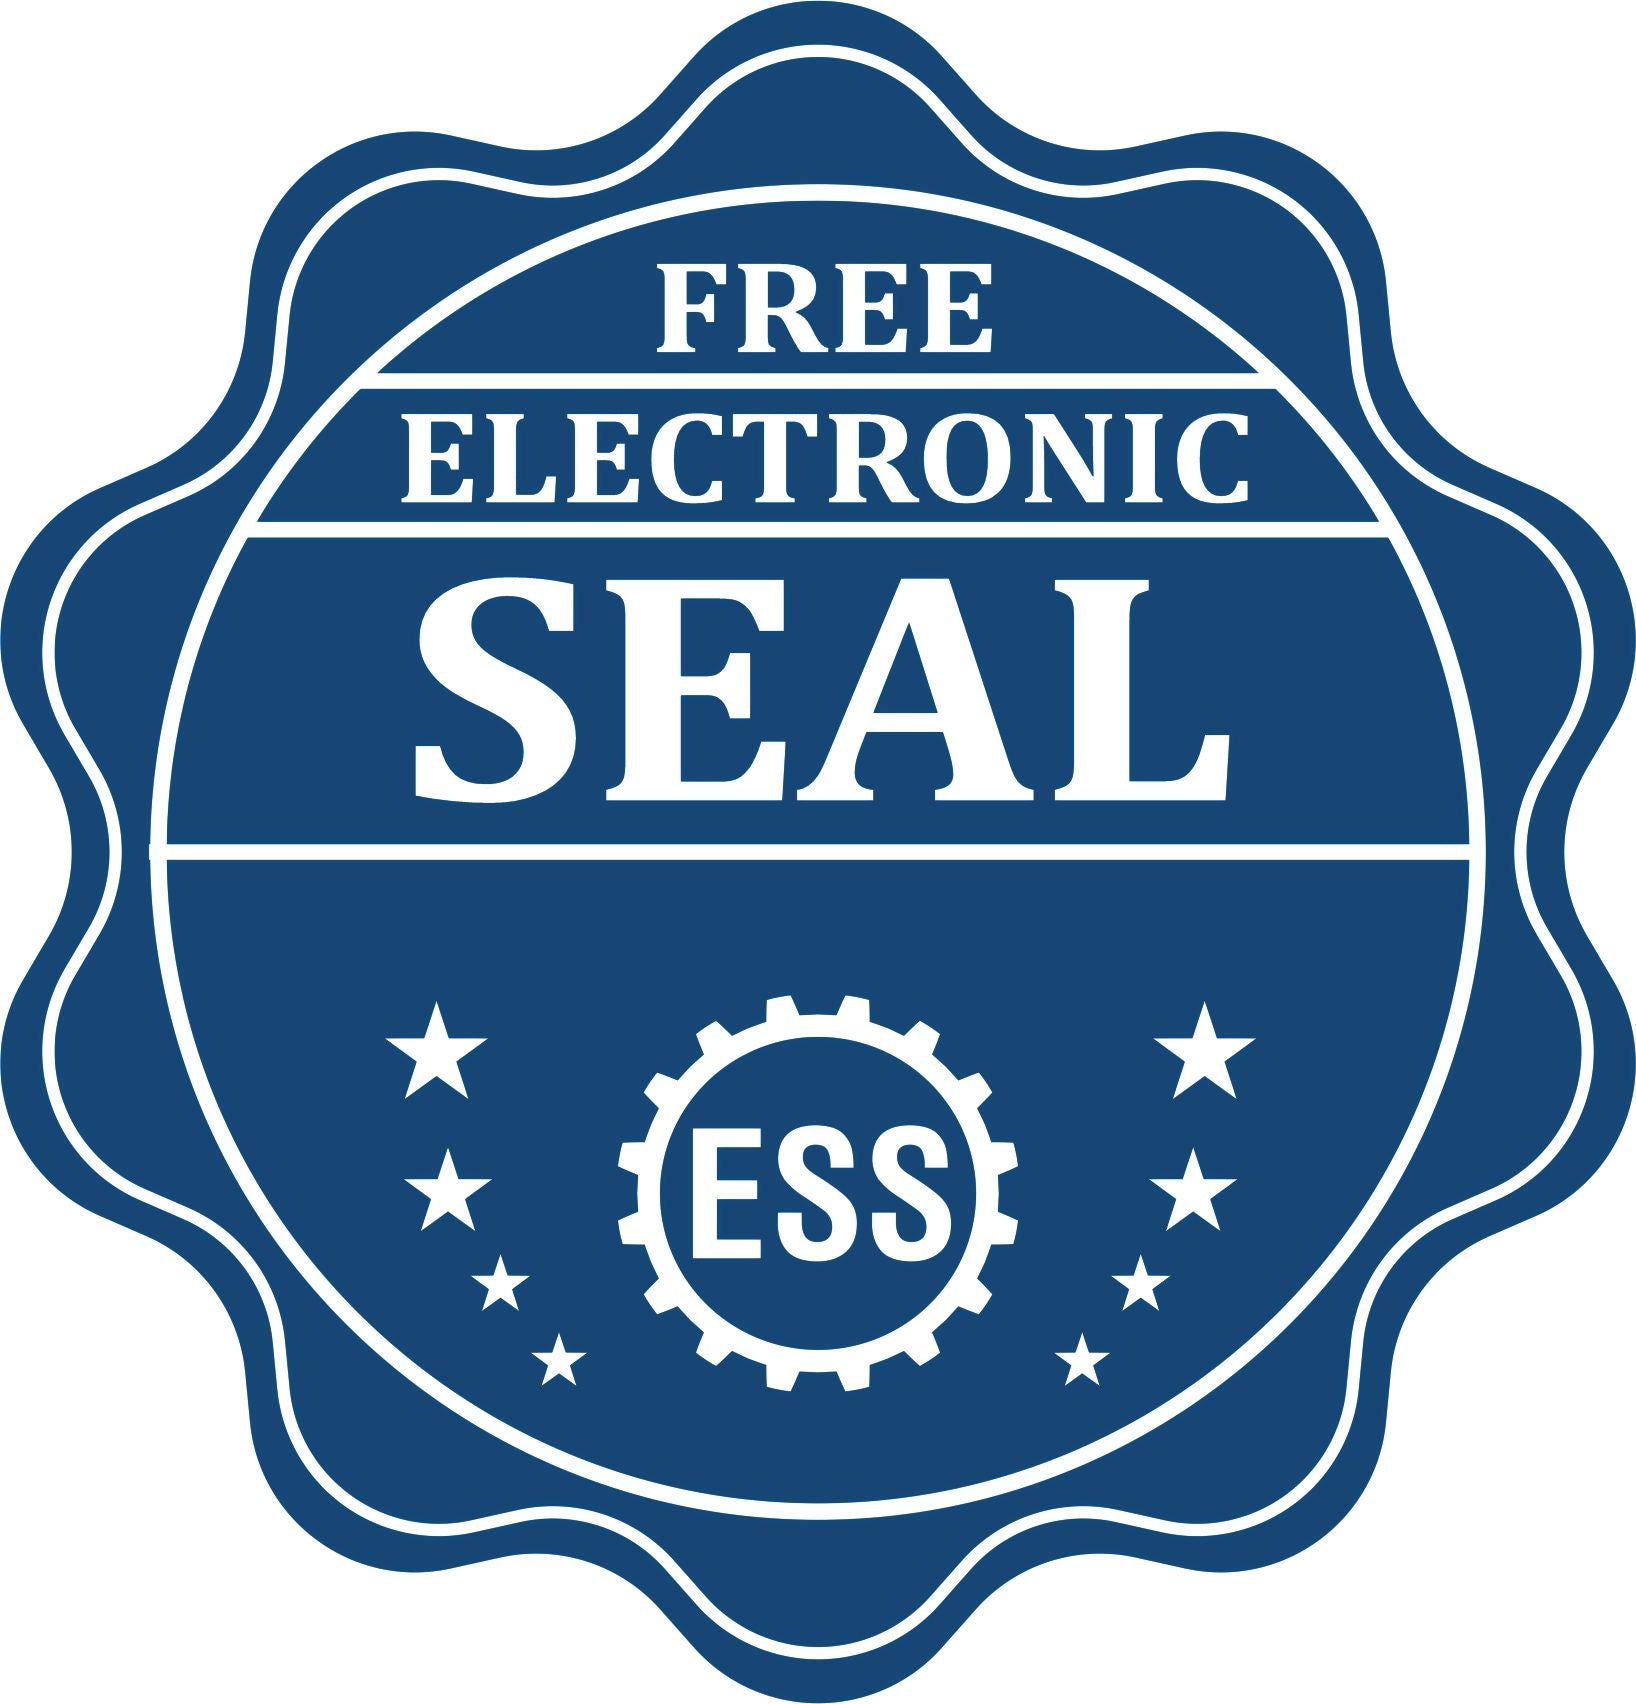 A badge showing a free electronic seal for the Handheld Delaware Professional Engineer Embosser with stars and the ESS gear on the emblem.